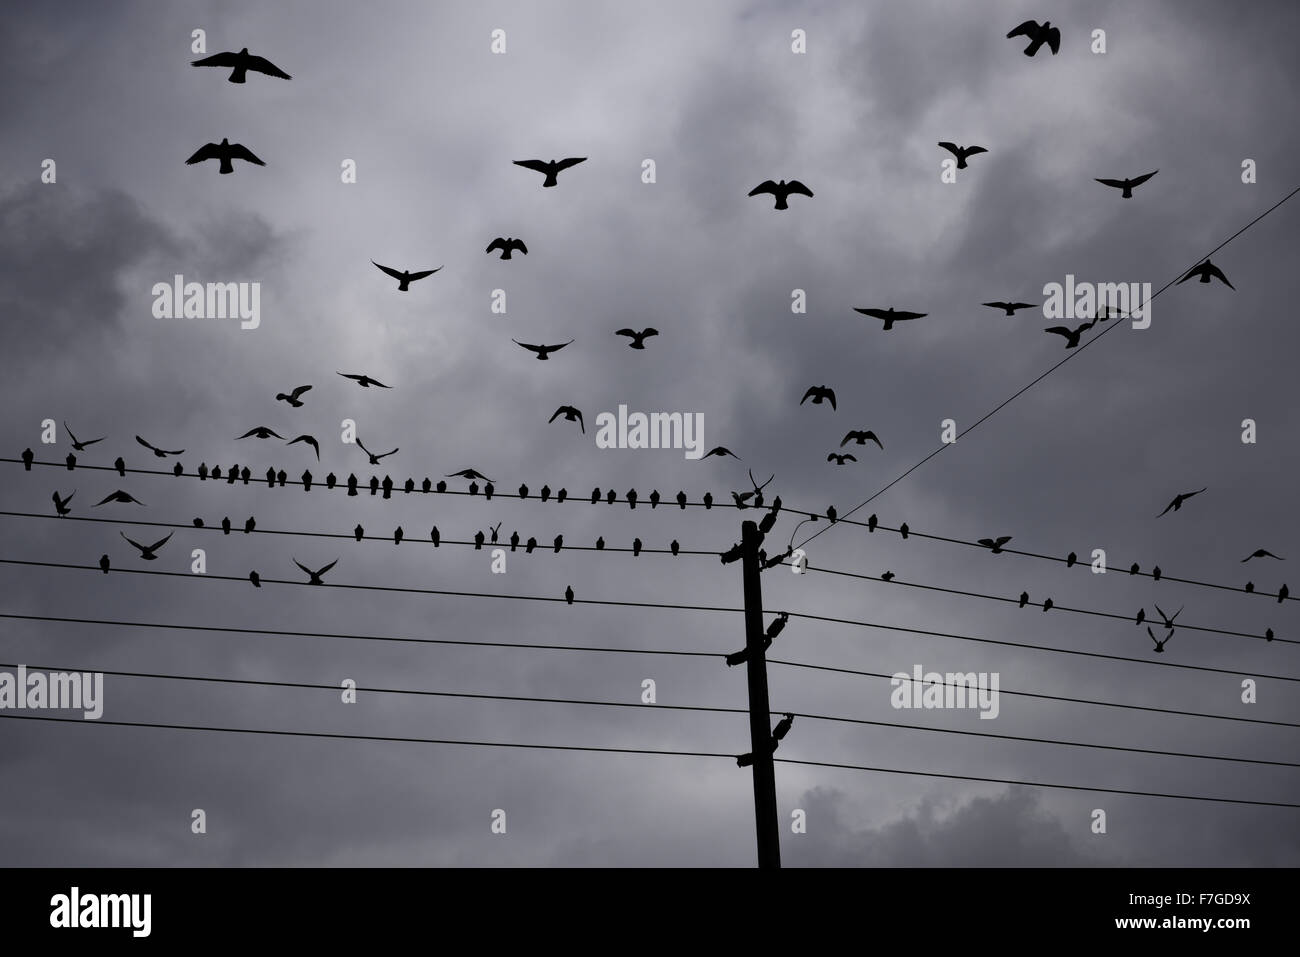 Flock of pigeons on hydro wires taking off and flying against a clouded sky Stock Photo